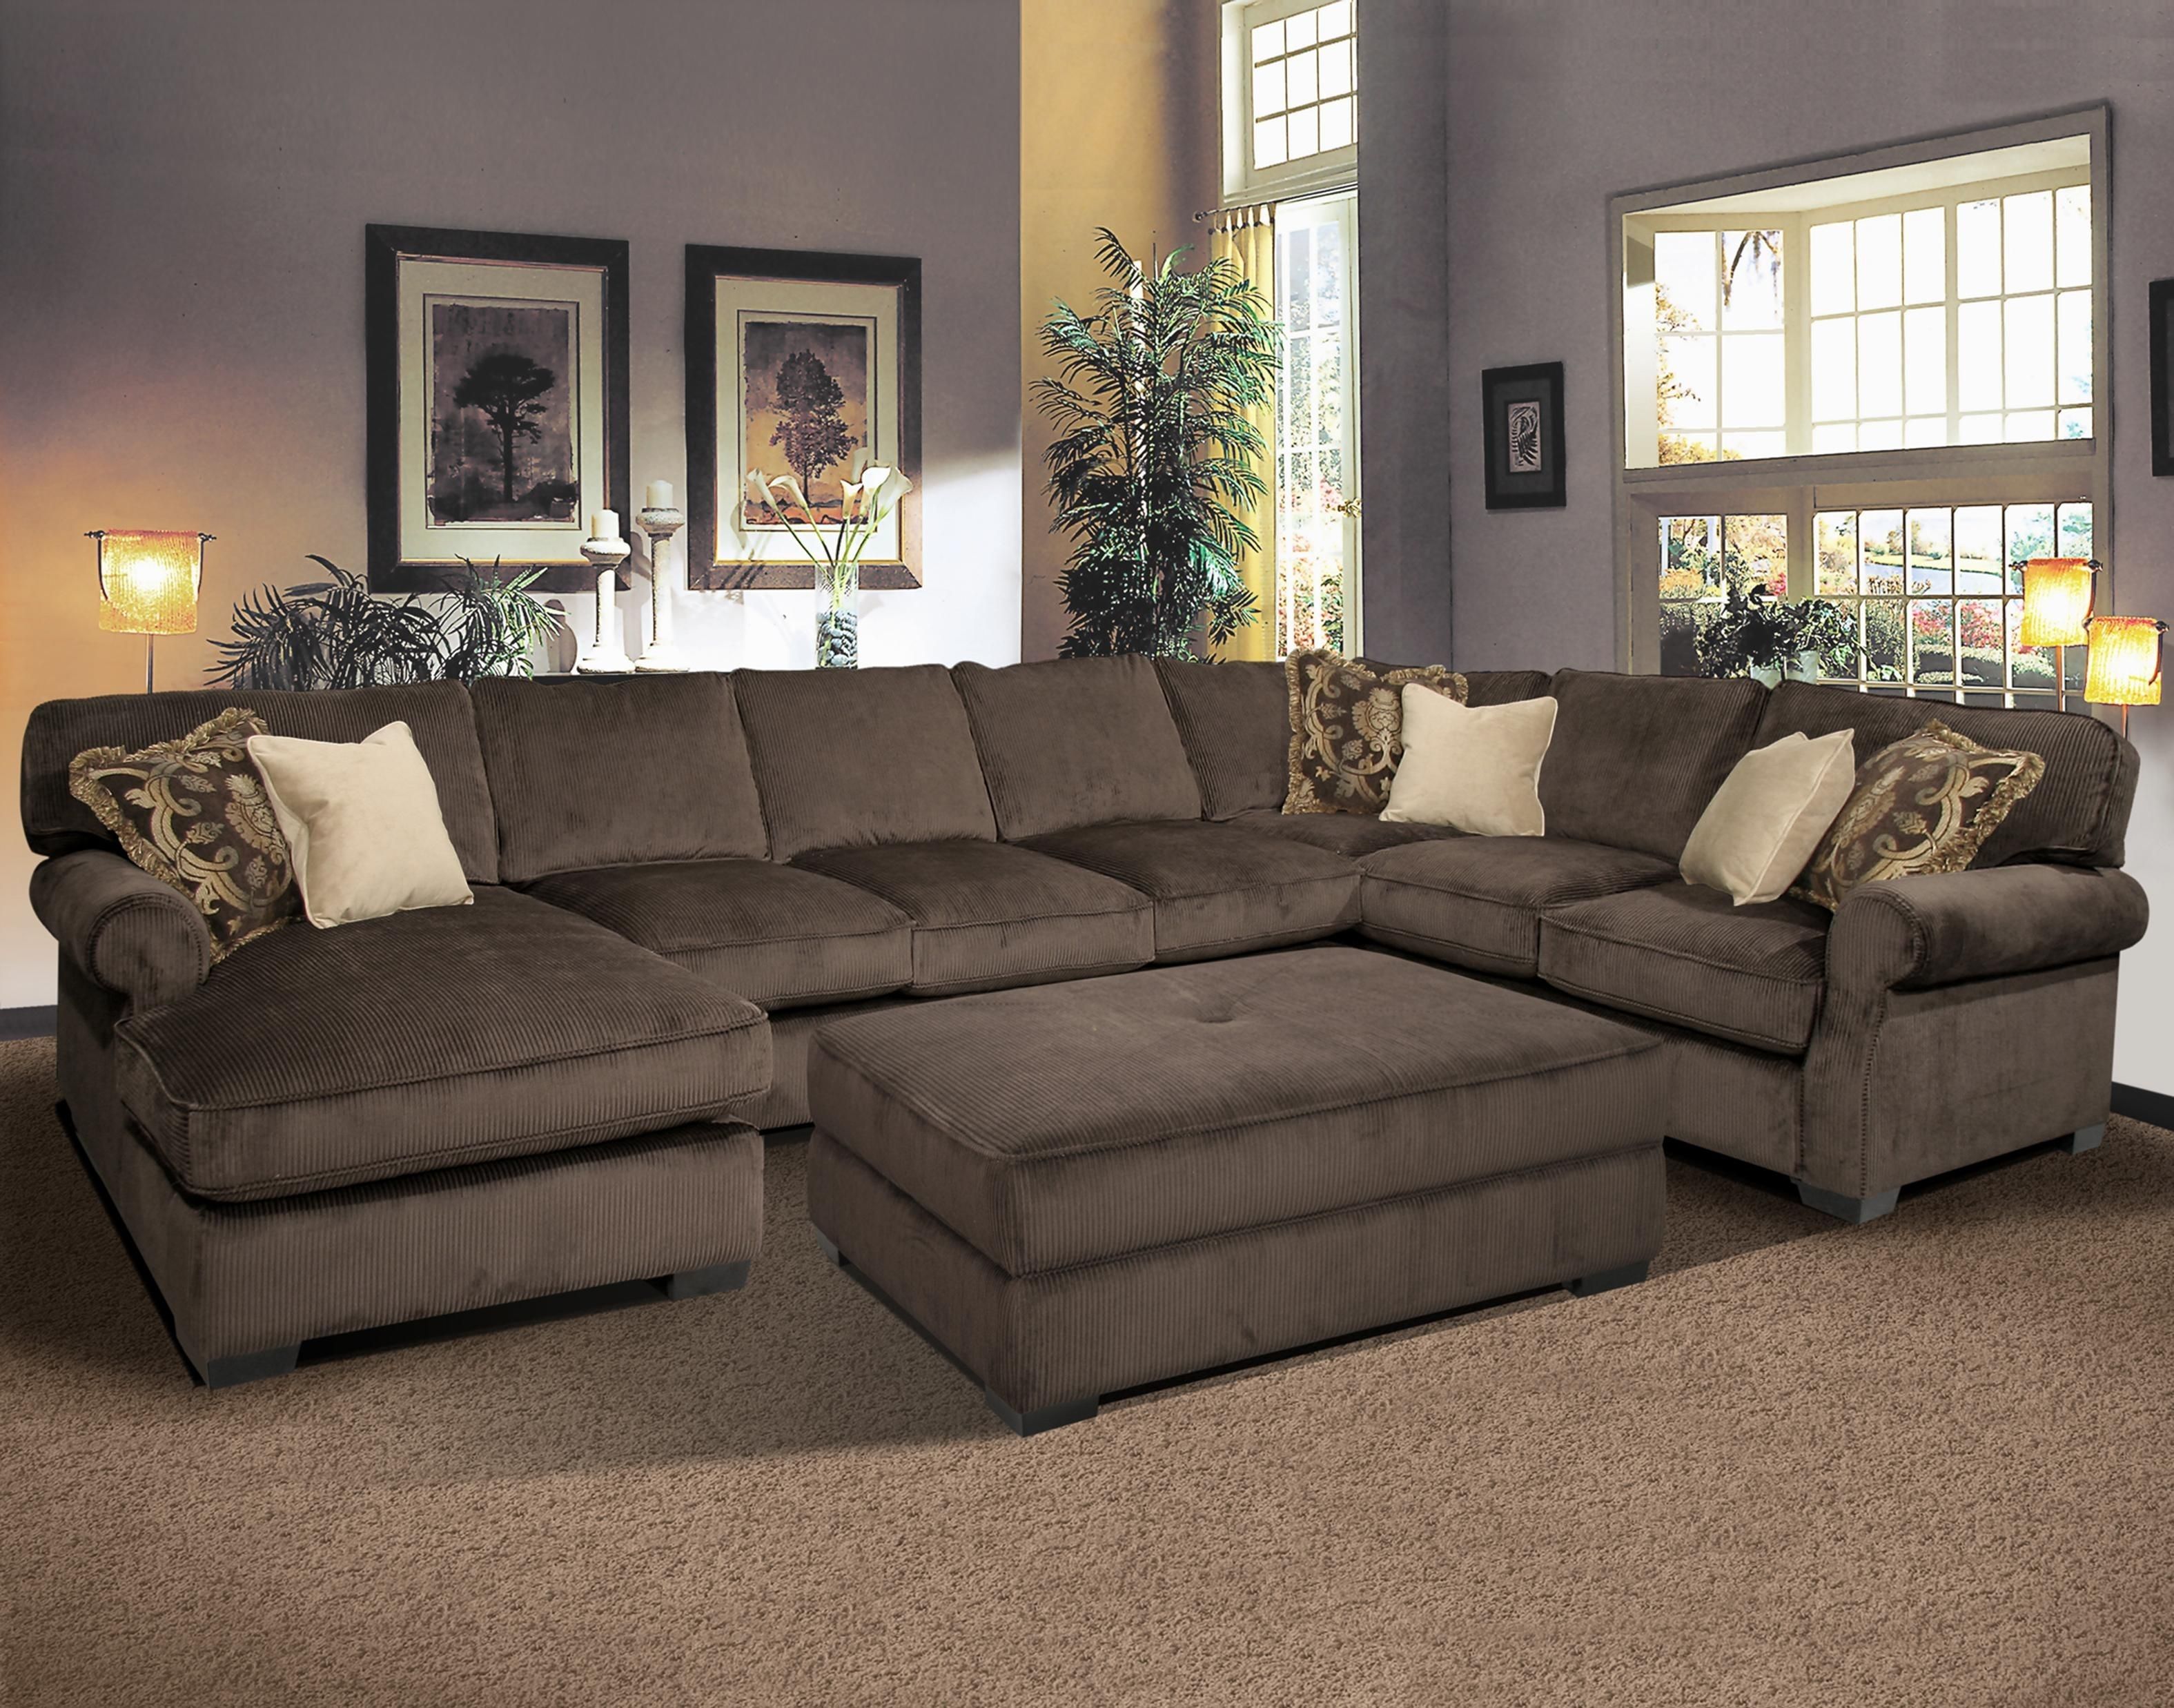 Grand Island Oversized Cocktail Ottoman For Sectional Sofa Within Sofas With Chaise And Ottoman (Photo 3 of 10)